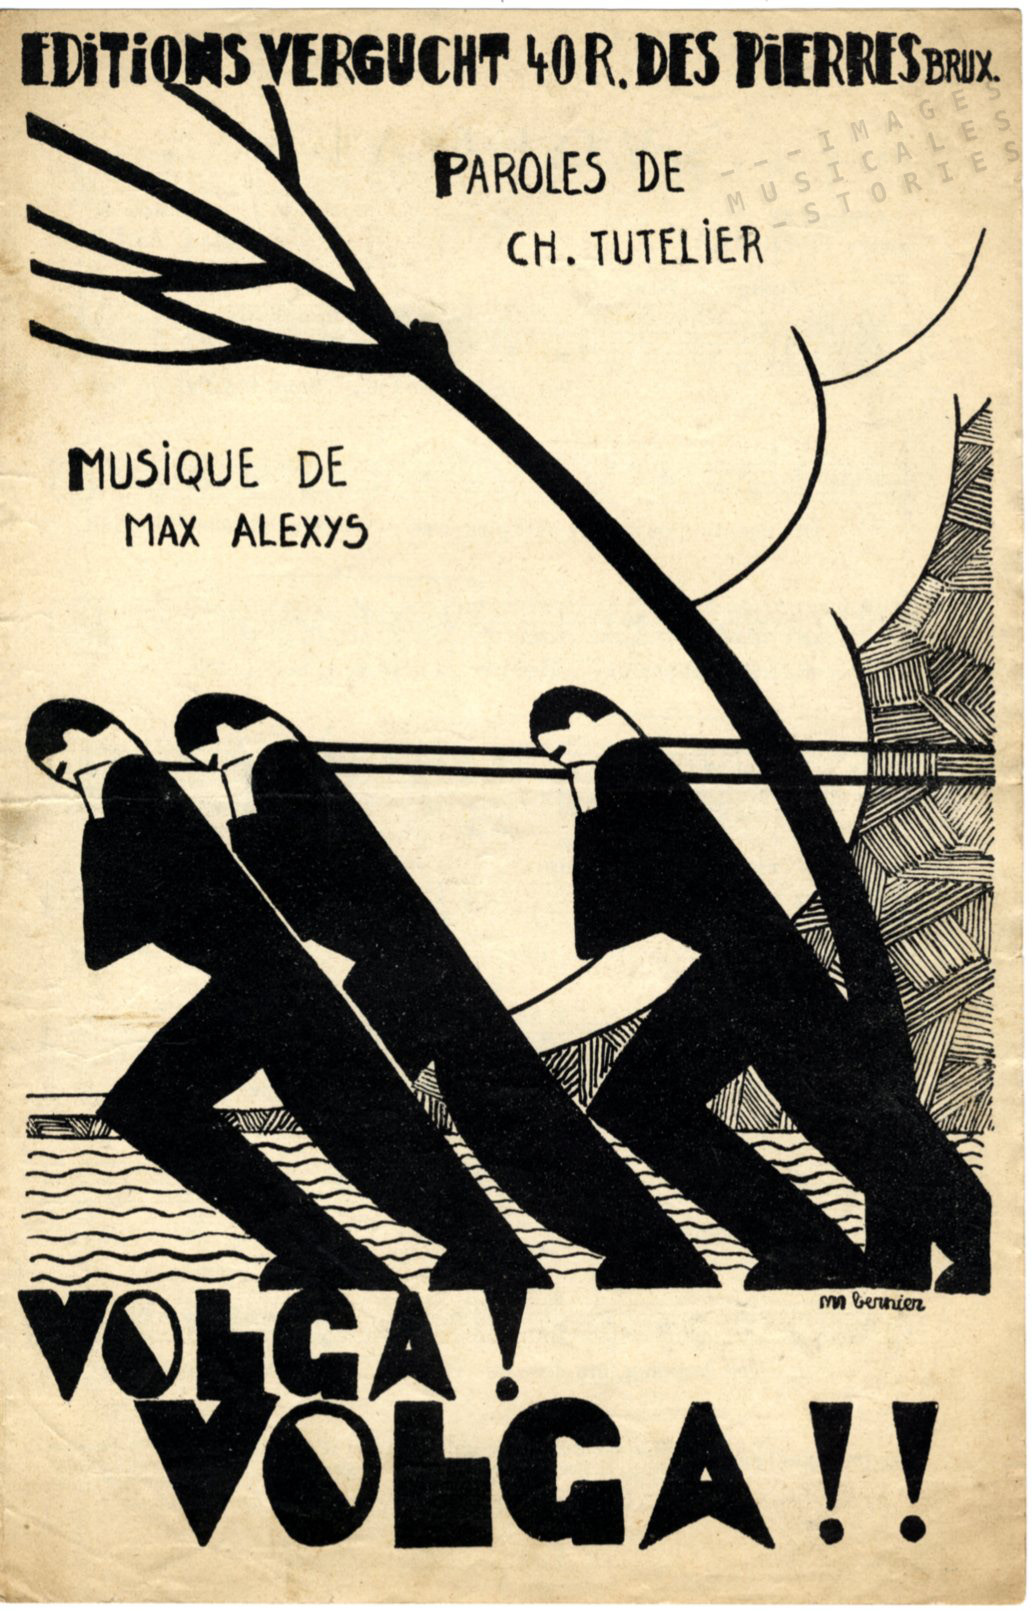 Cover for the sheet music 'Volga!' by Max Alexis and Charles Tutelier, published by Vergucht and illustrated by Alfred Mariano Bernier